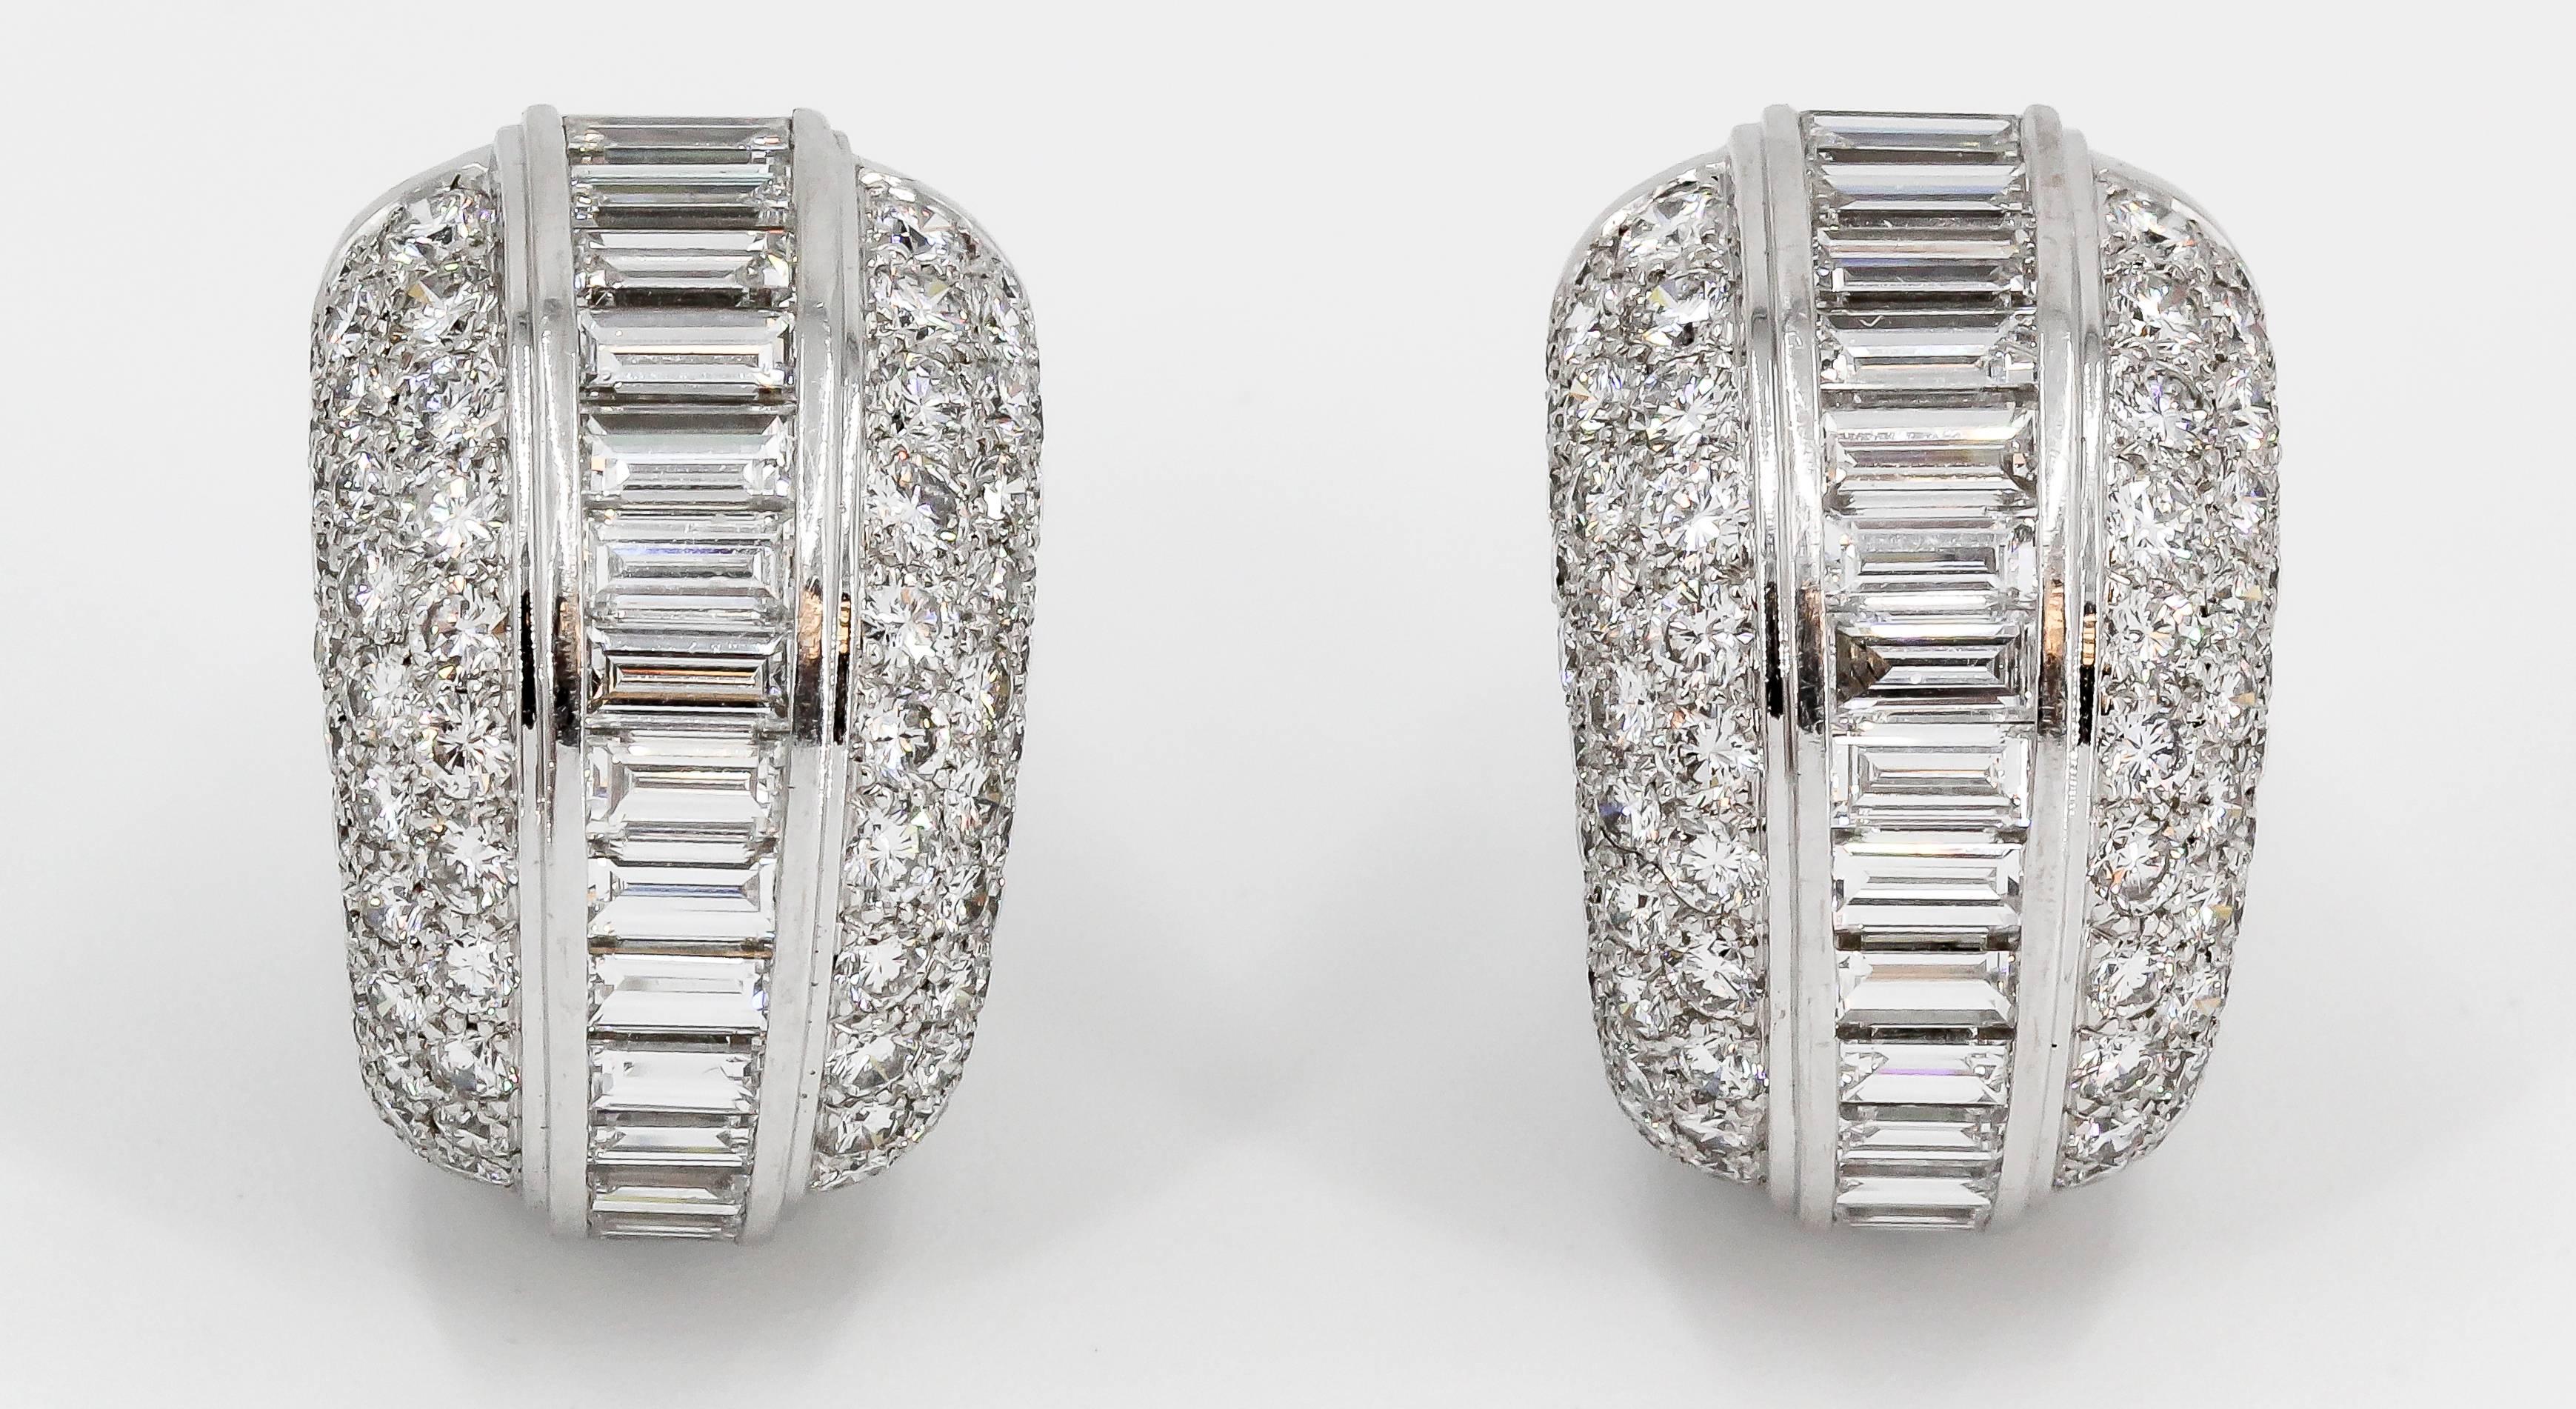 Very fine diamond and 18K white gold hoop earrings by Cartier. They feature high grade round and tapered baguette cut diamonds of F-G color and VVs clarity, approx. 10 carats total weight. A stunning pair of earrings that are exceptionally crafted. 